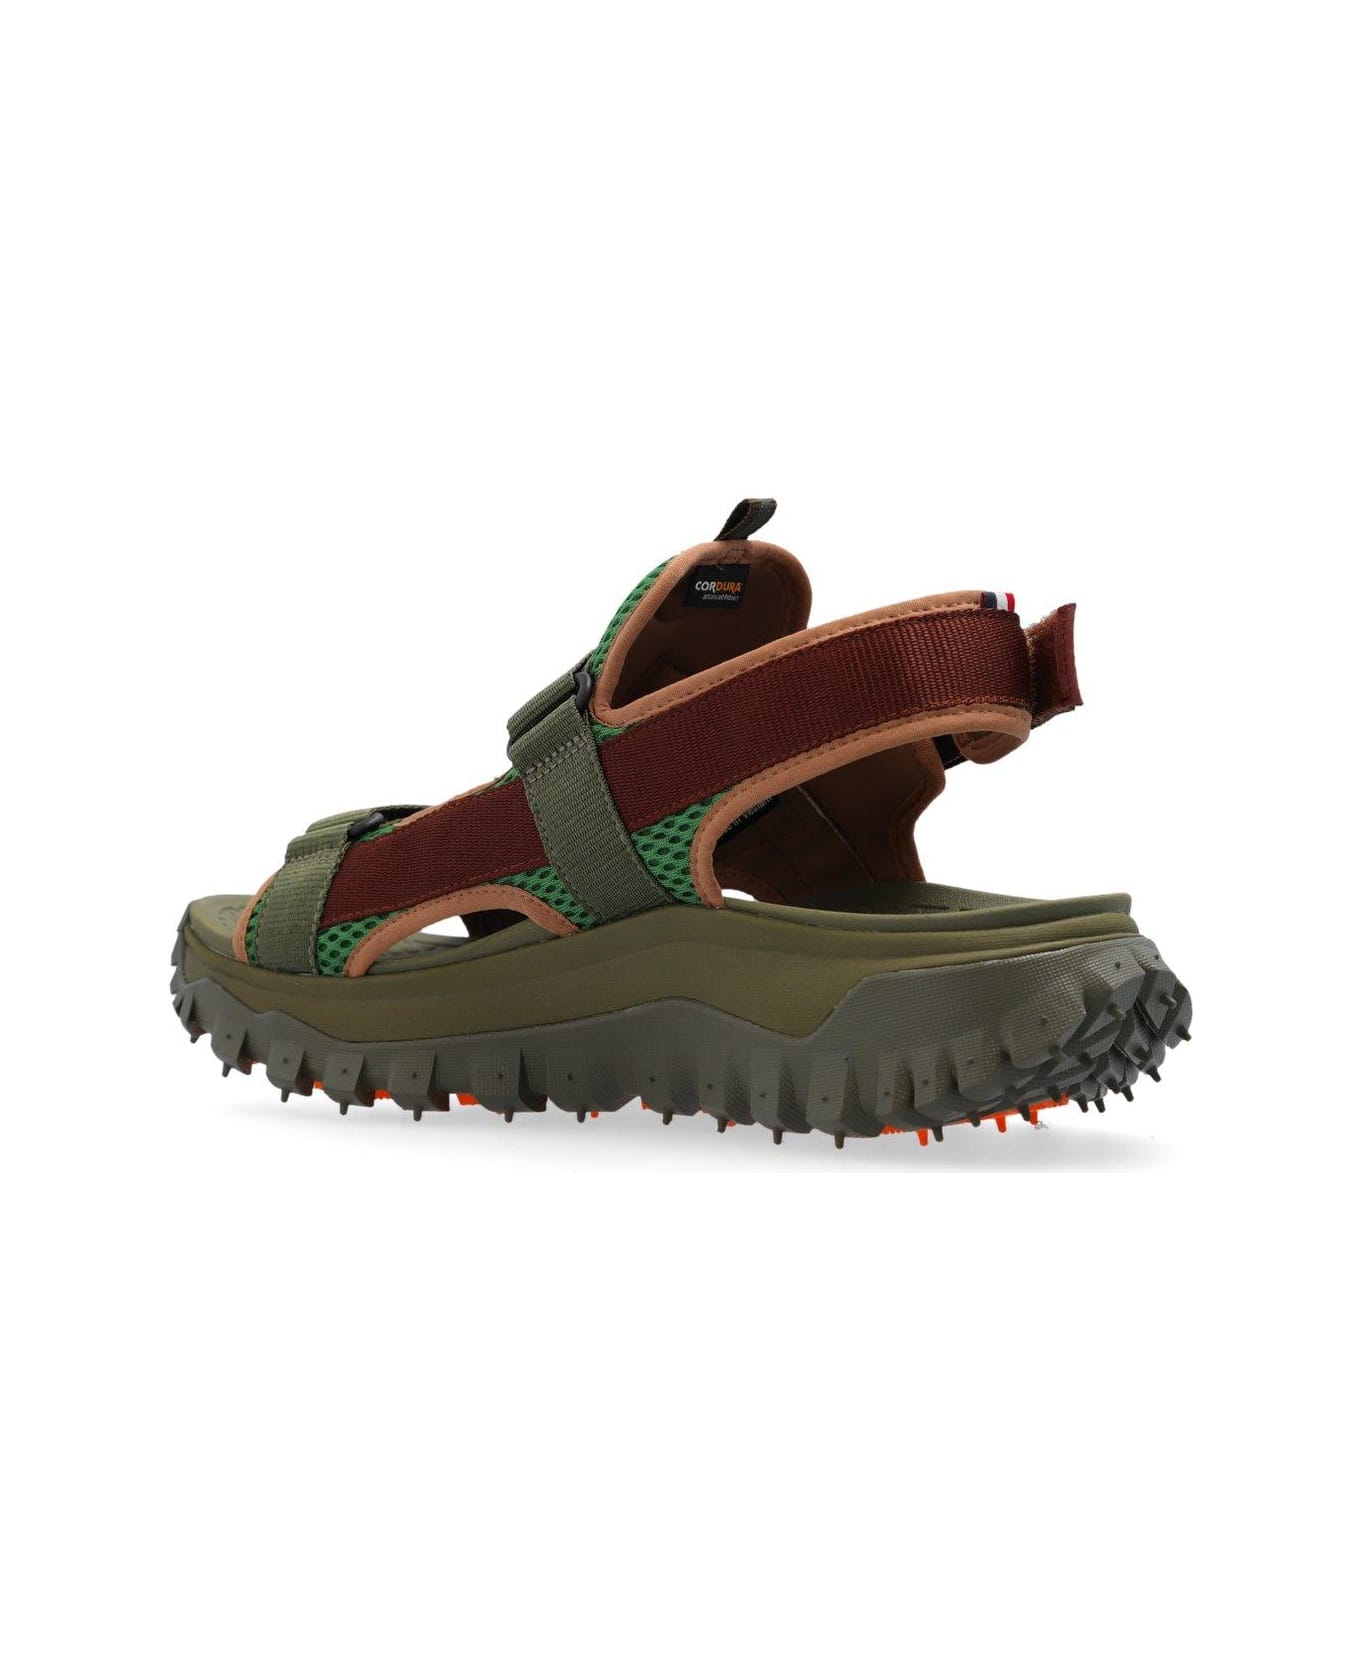 Moncler Trailgrip Round-toe Sandals - Green